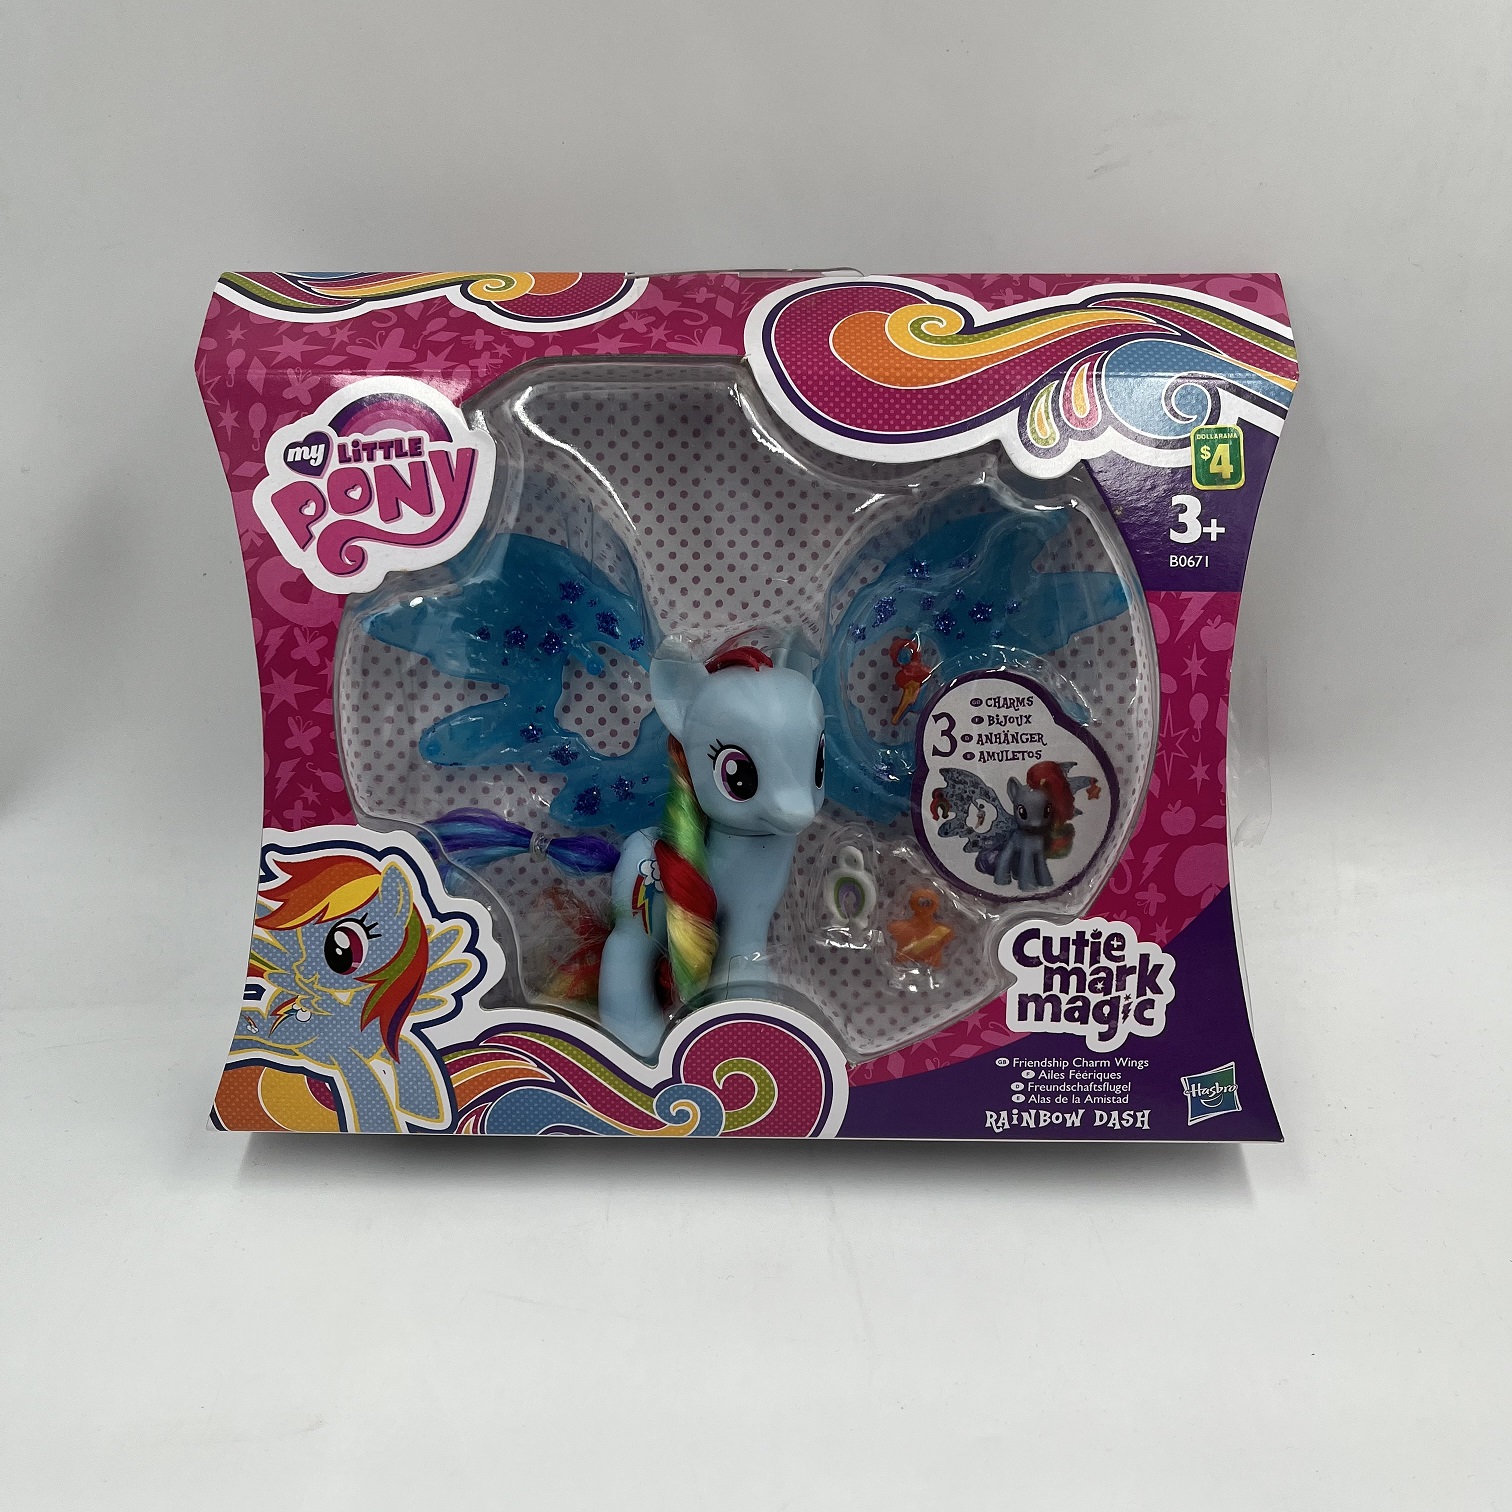 8cm Hasbro Original My Little Pony Action Figure Model Toy Collection Hobby Gift 1 - My Little Pony Plush